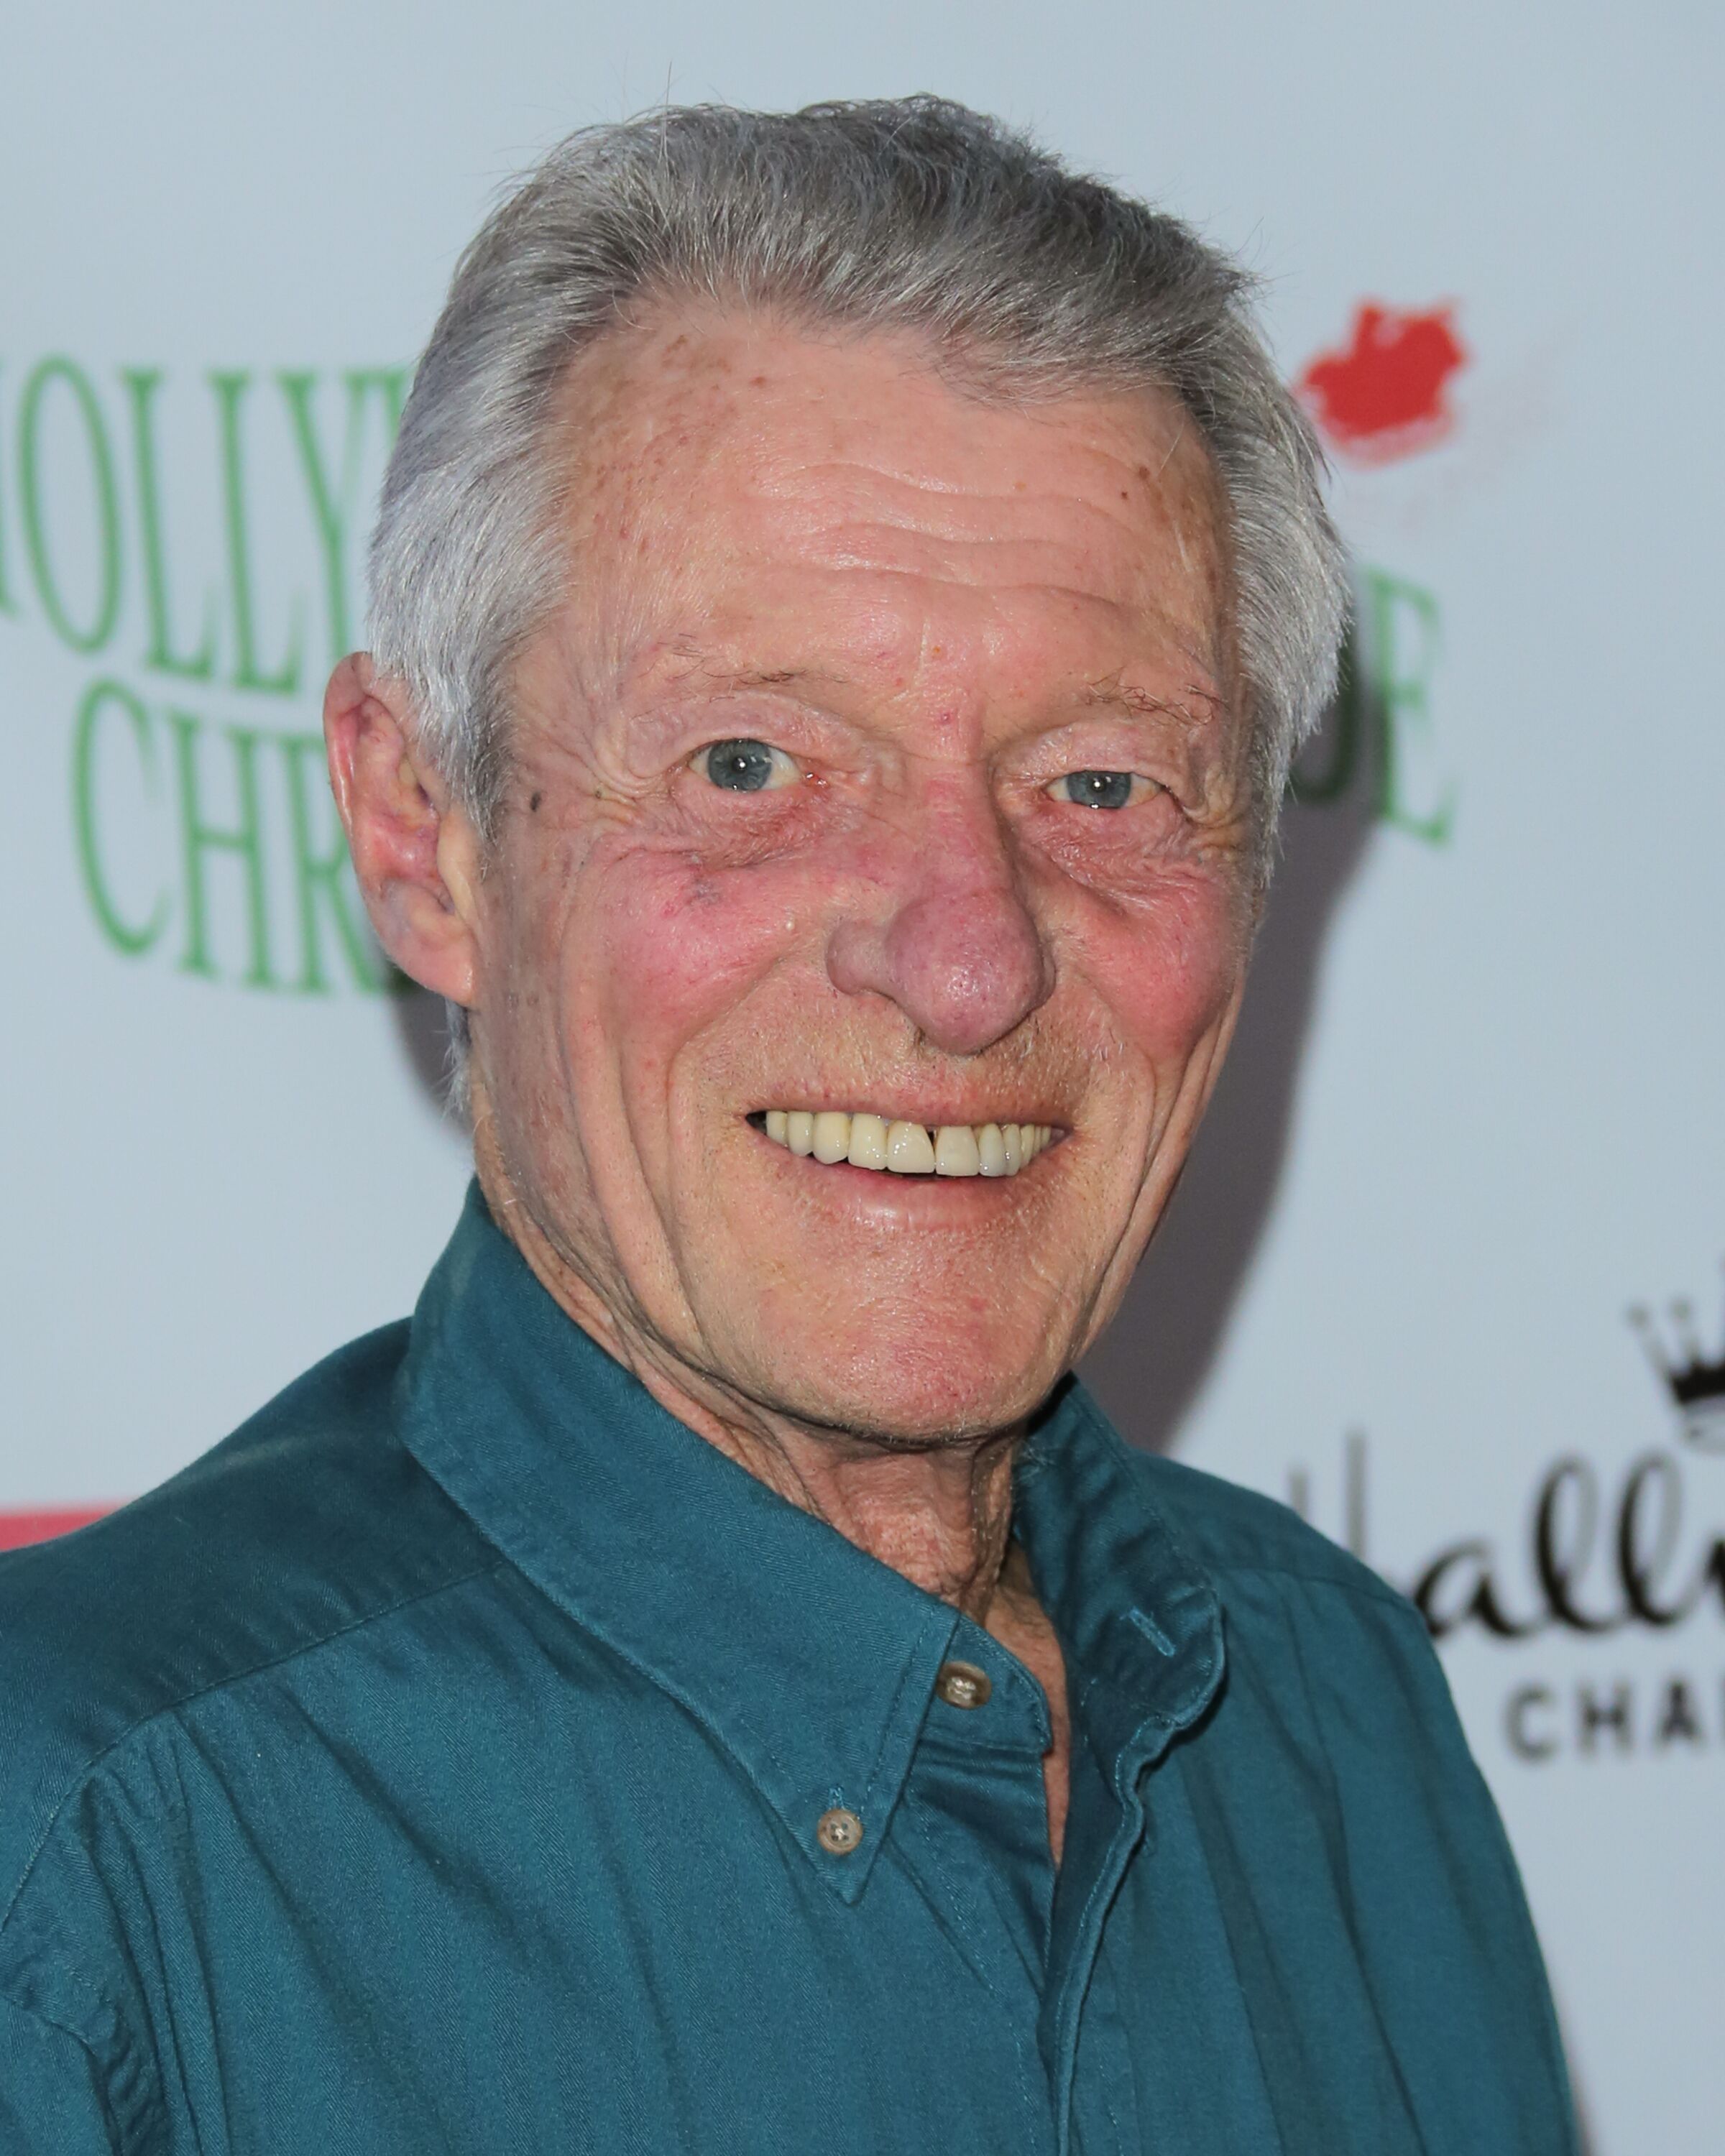 Ken Osmond at The Hollywood Christmas Parade benefiting the Toys For Tots Foundation on December 1, 2013 in Hollywood, California | Photo: Getty Images 